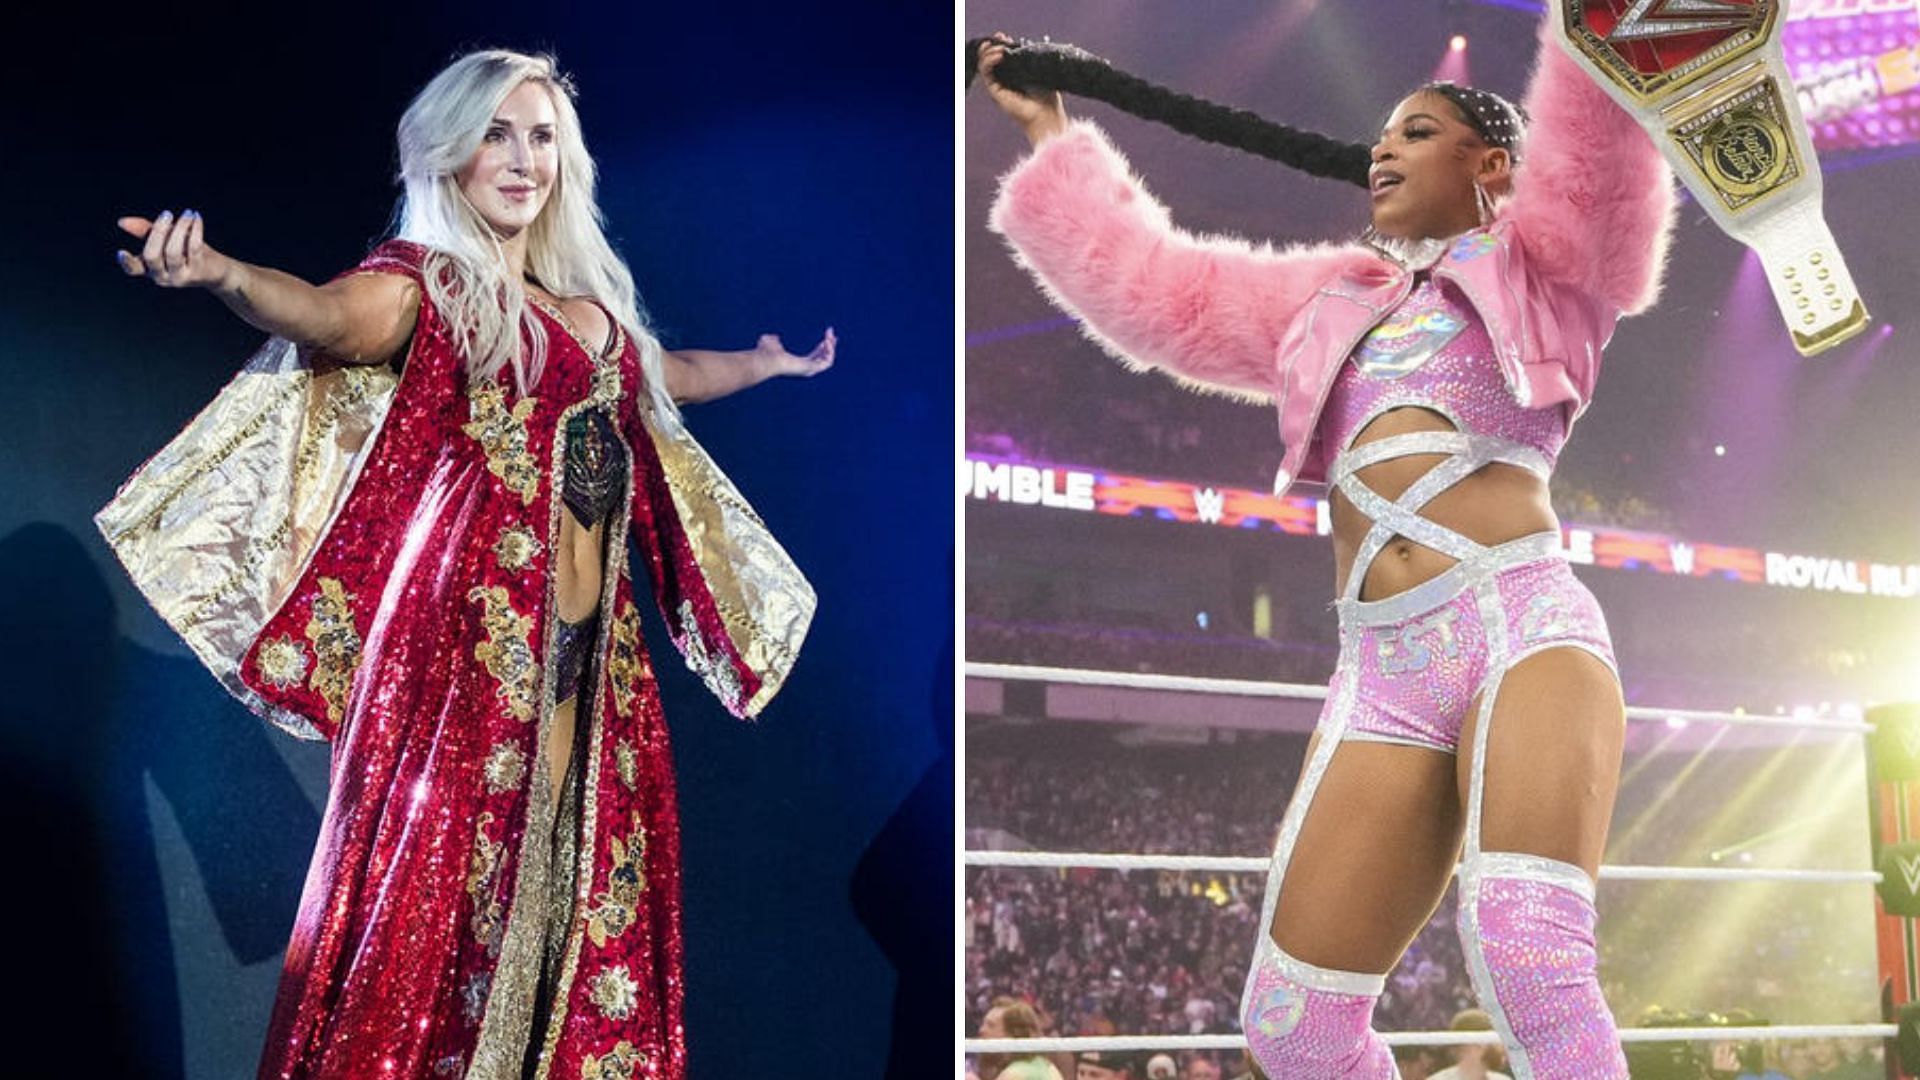 Charlotte Flair and Bianca Belair are two of the best in the business